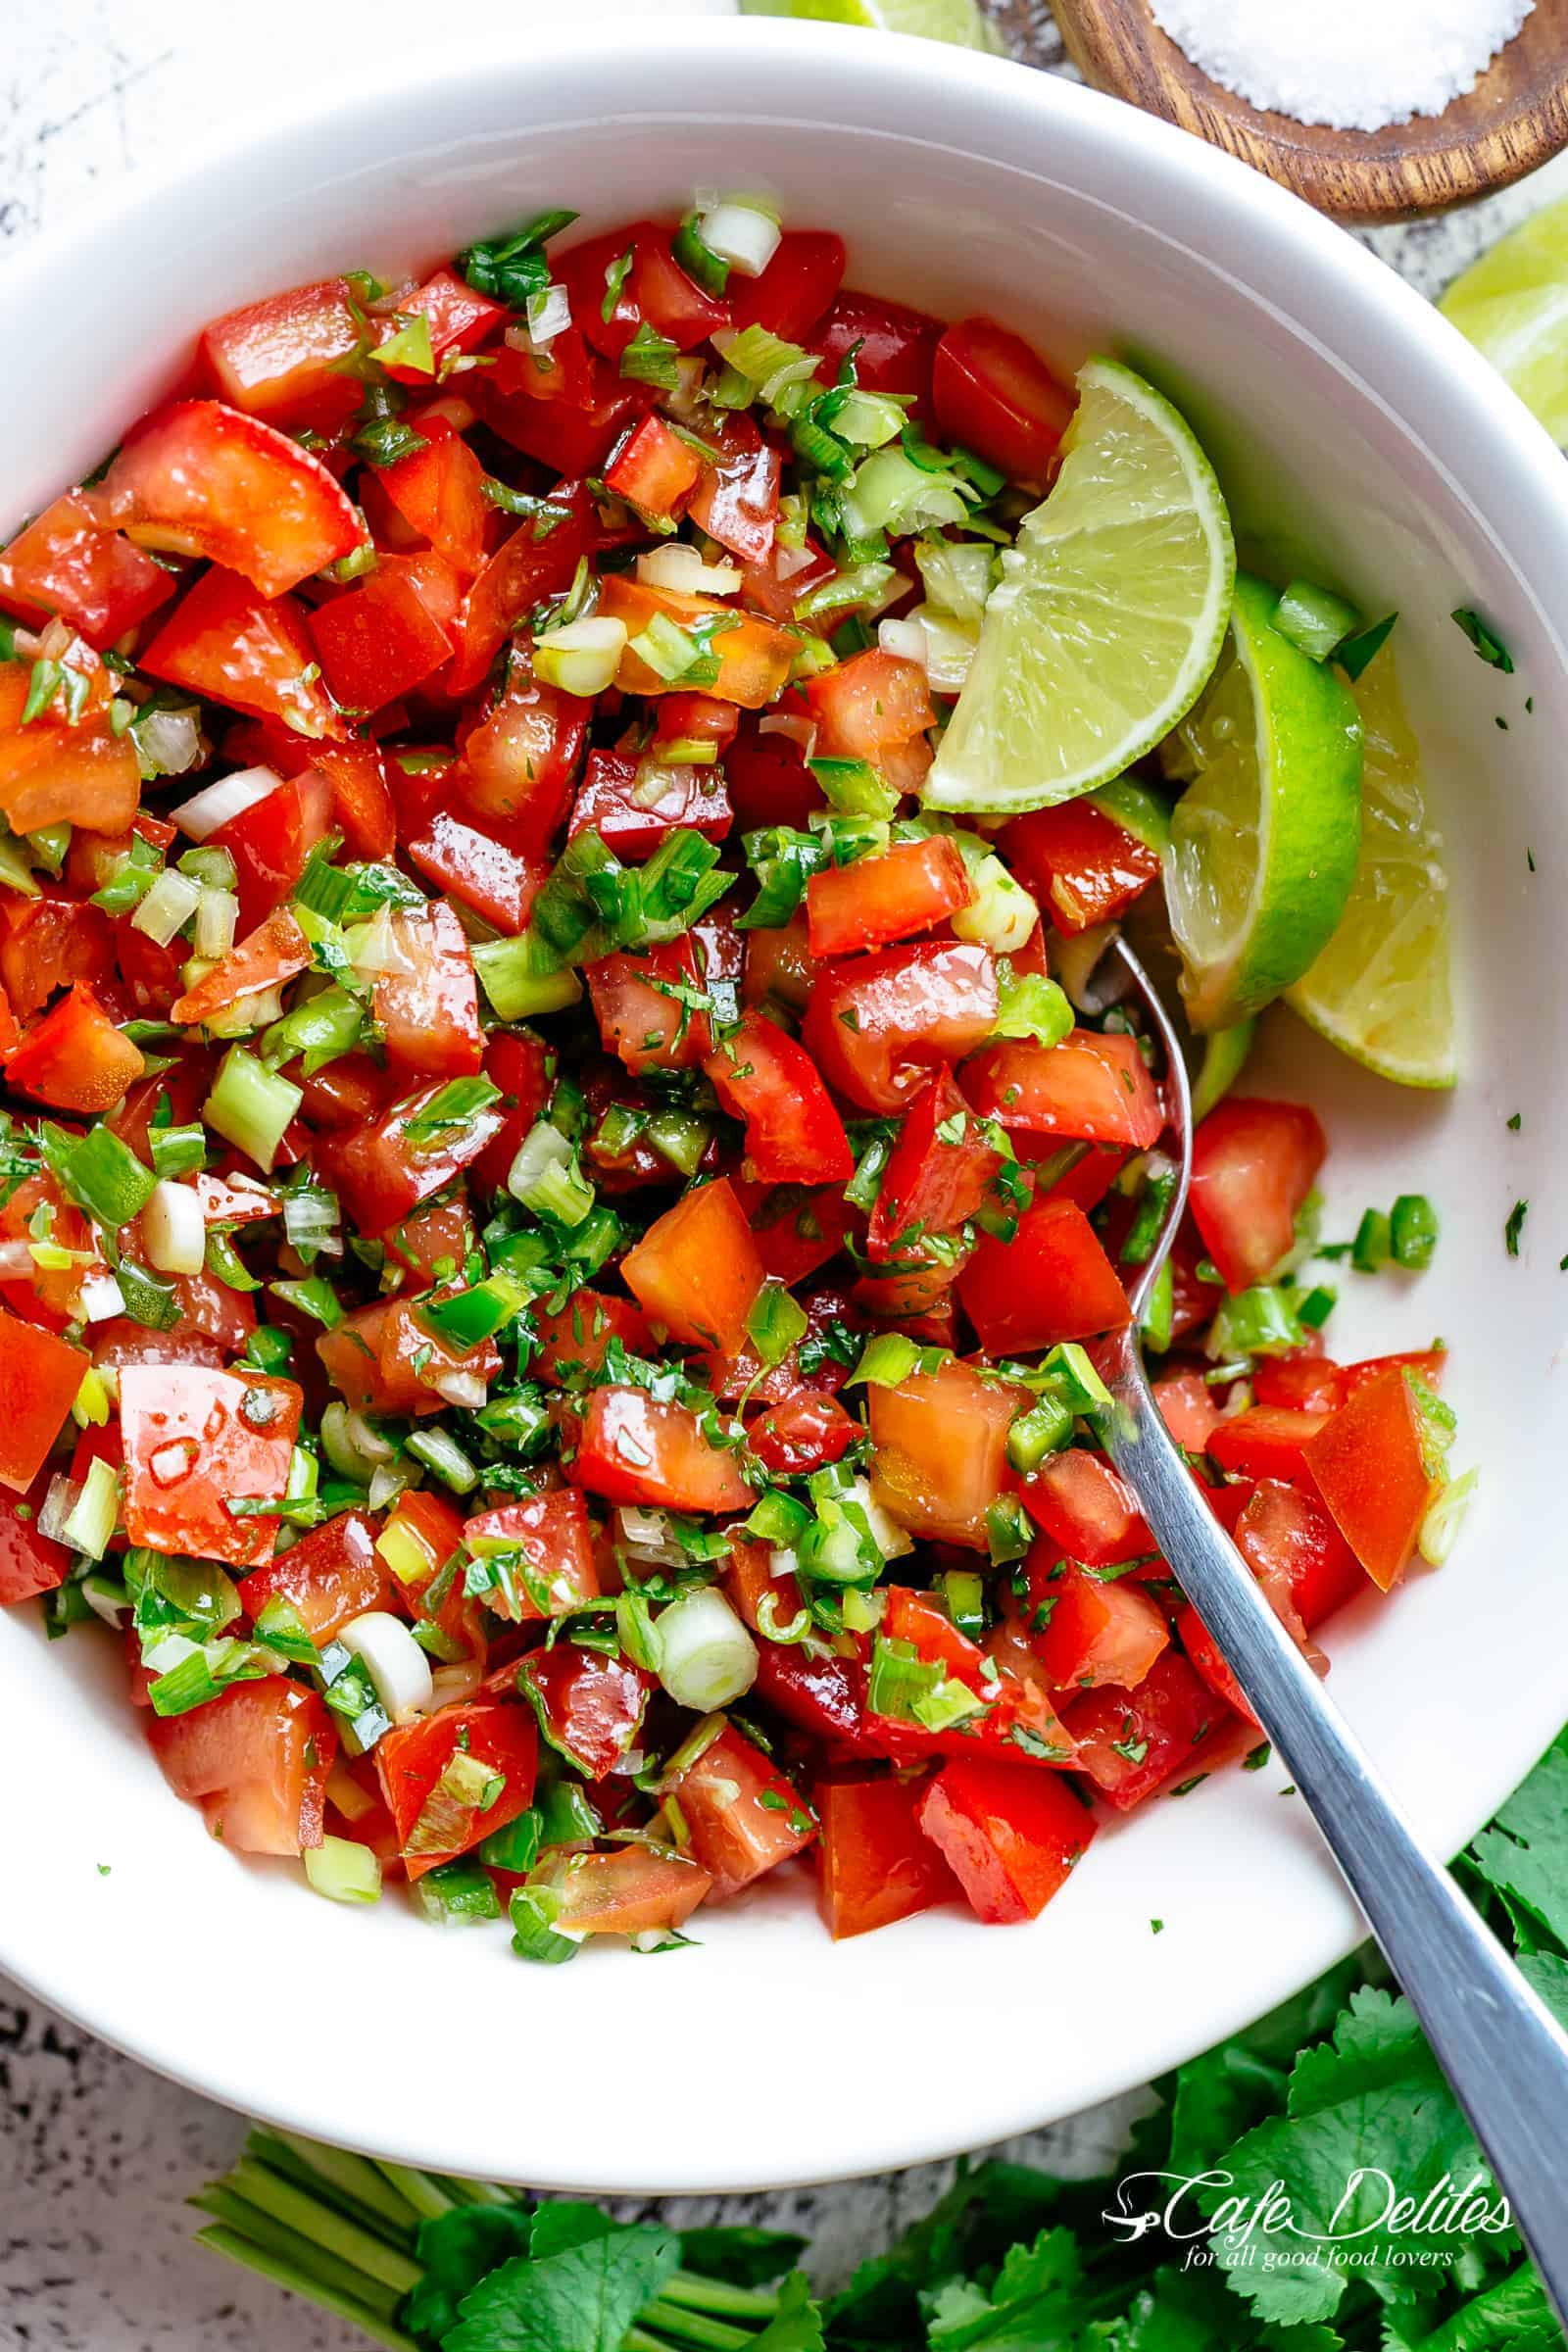 Pico De Gallo is a super easy to make fresh tomato salsa you can serve with anything! From tortilla chips to tacos, enchiladas or Carne Asada! With a handful of ingredients, this Pico De Gallo is the perfect accompaniment! Also called salsa fresca or salsa cruda! | cafedelites.com